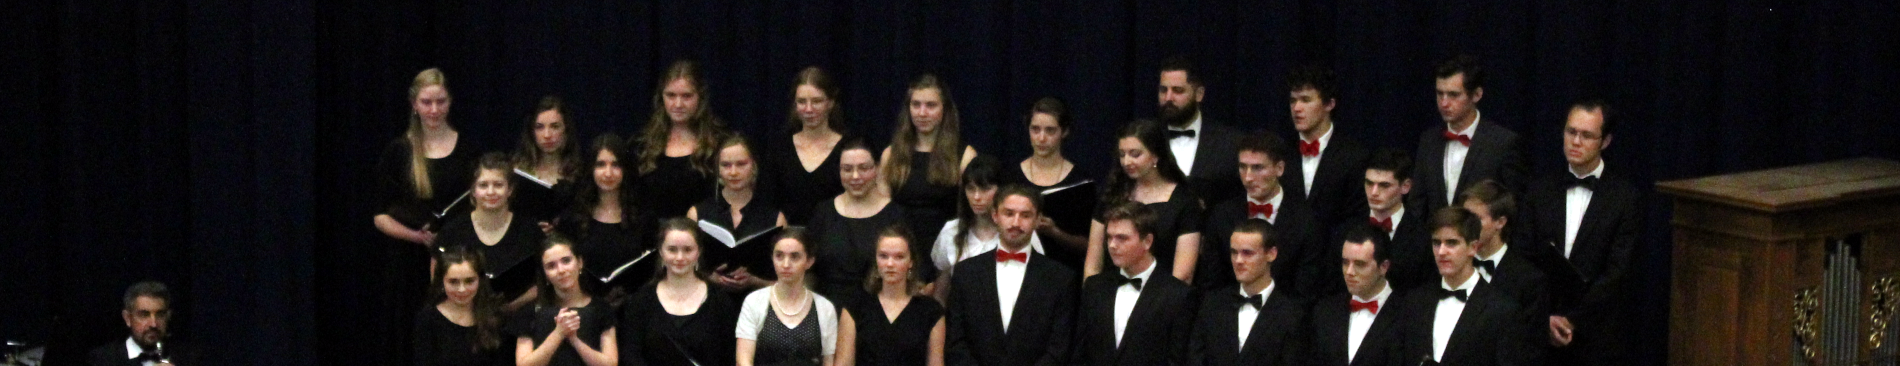 The whole choir together